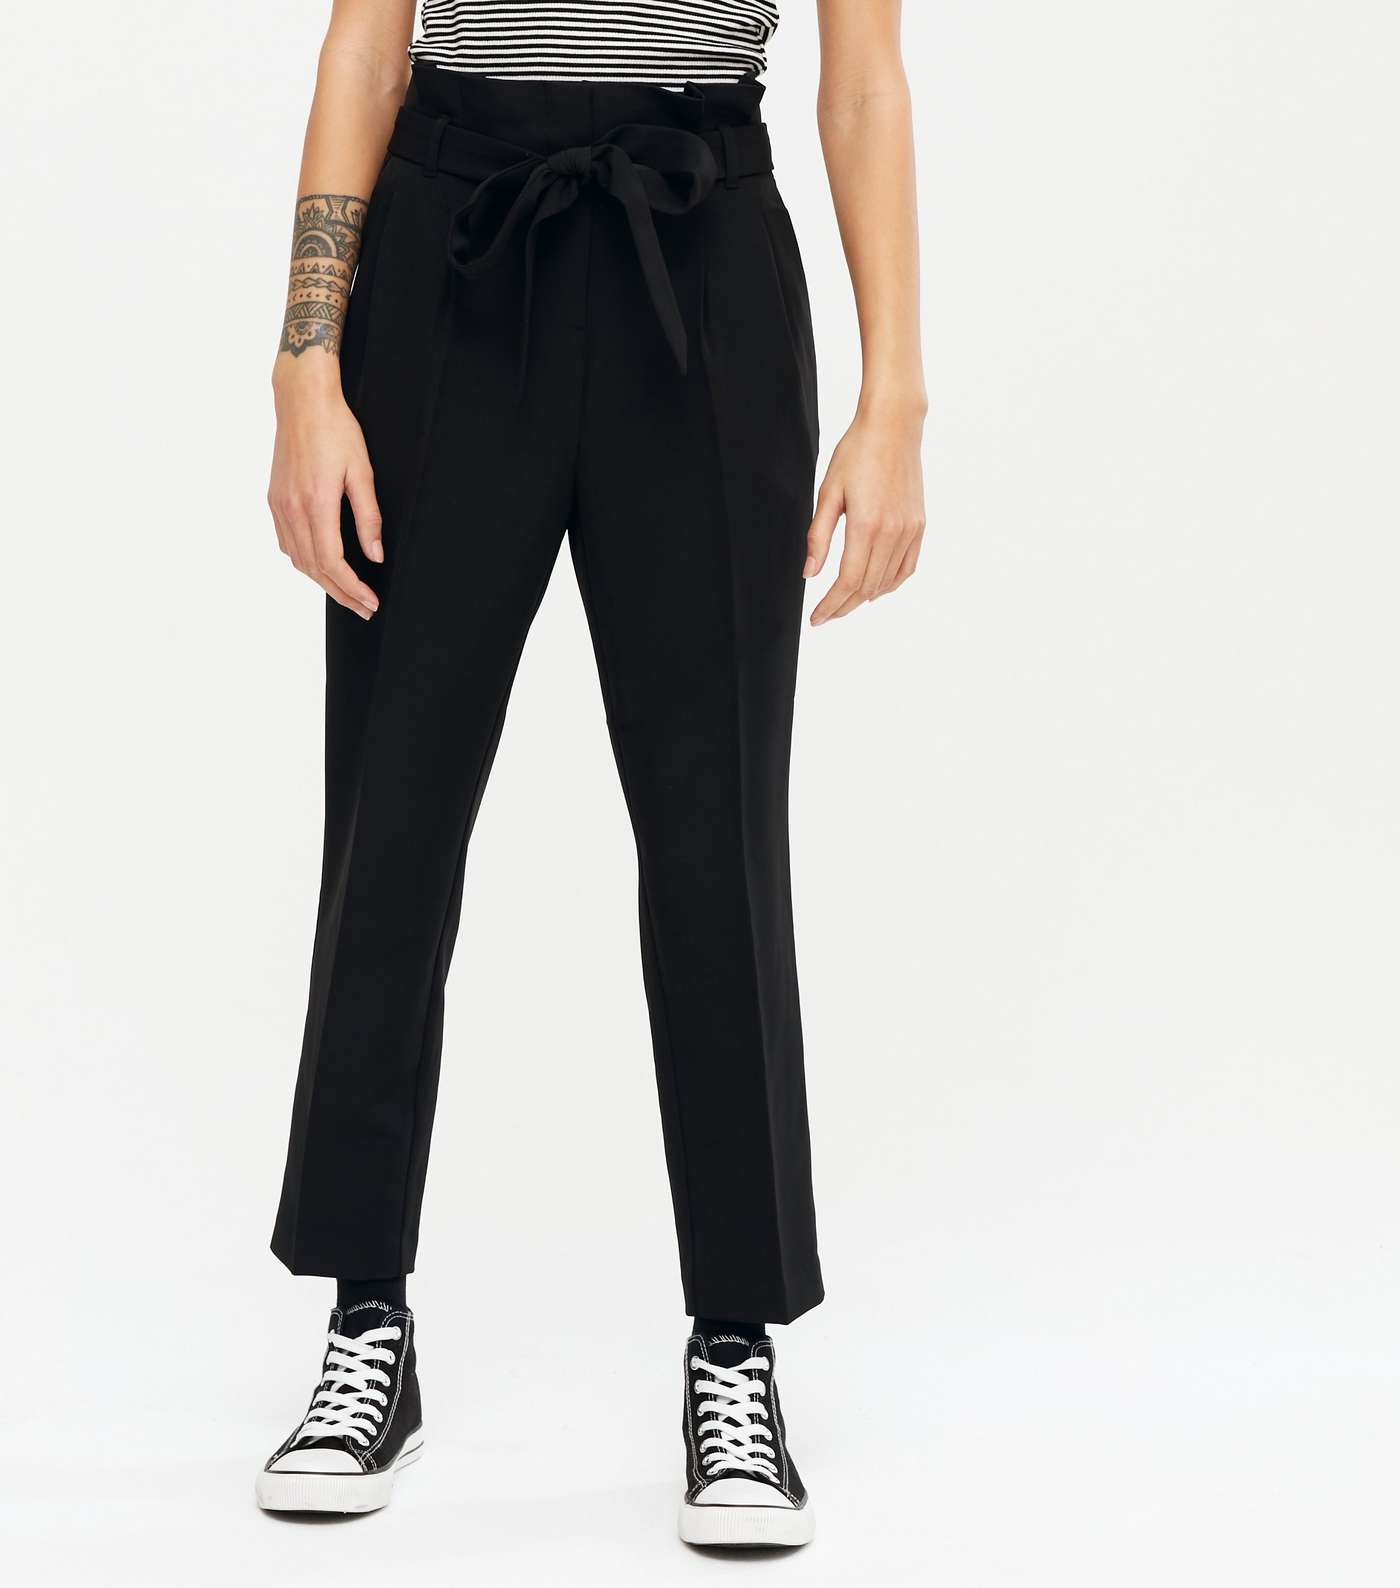 Petite Black Belted High Waist Trousers Image 2